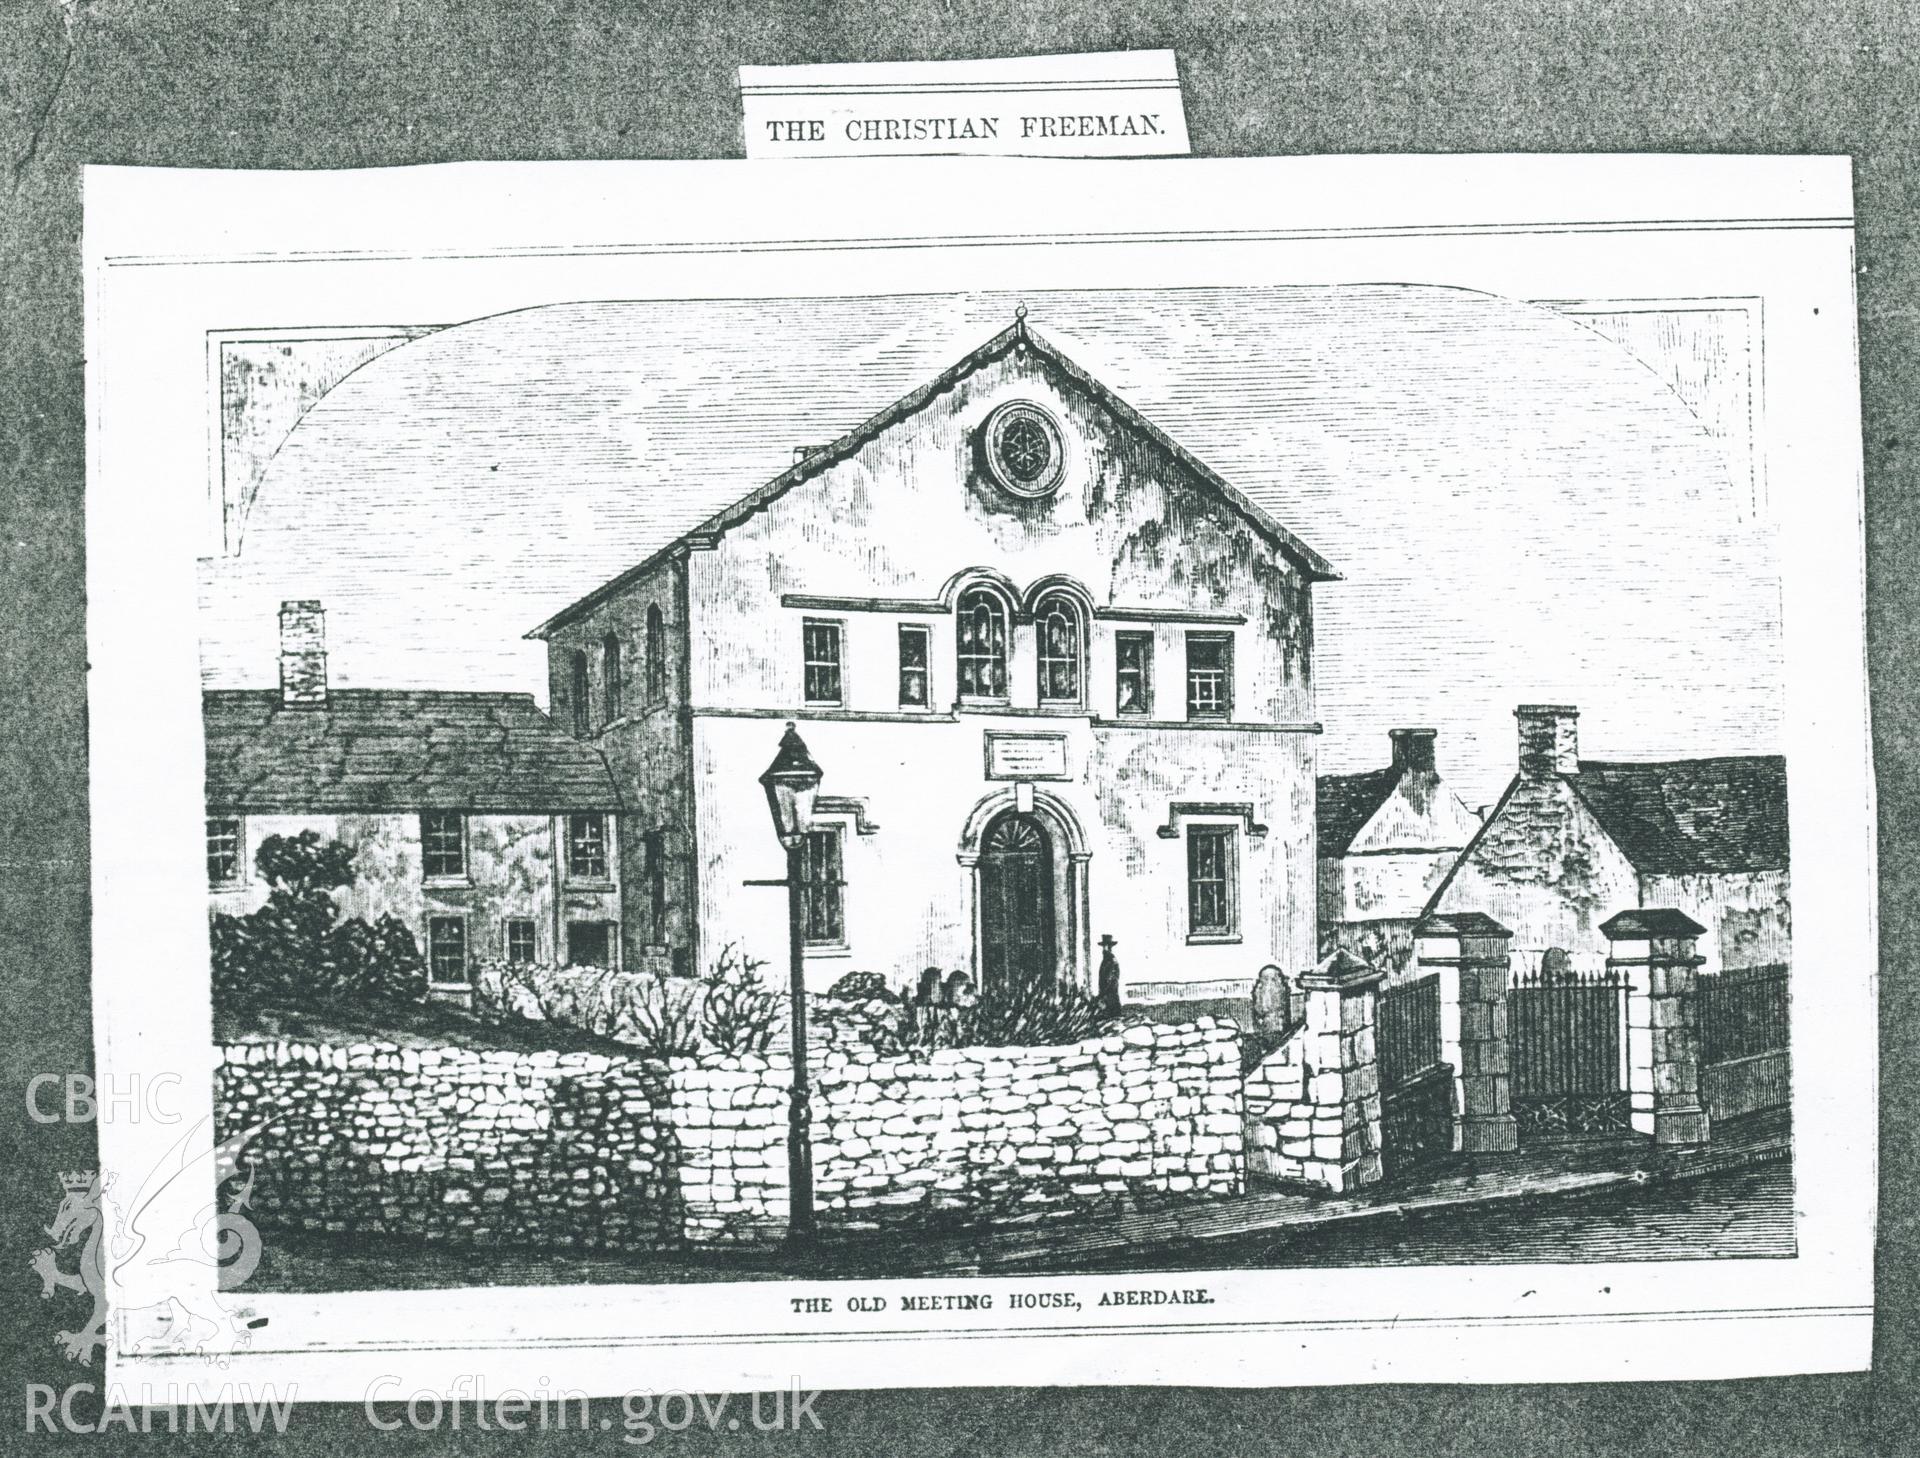 Undated print depicting 'The Old Meeting House, Aberdare'. Donated to the RCAHMW during the Digital Dissent Project.